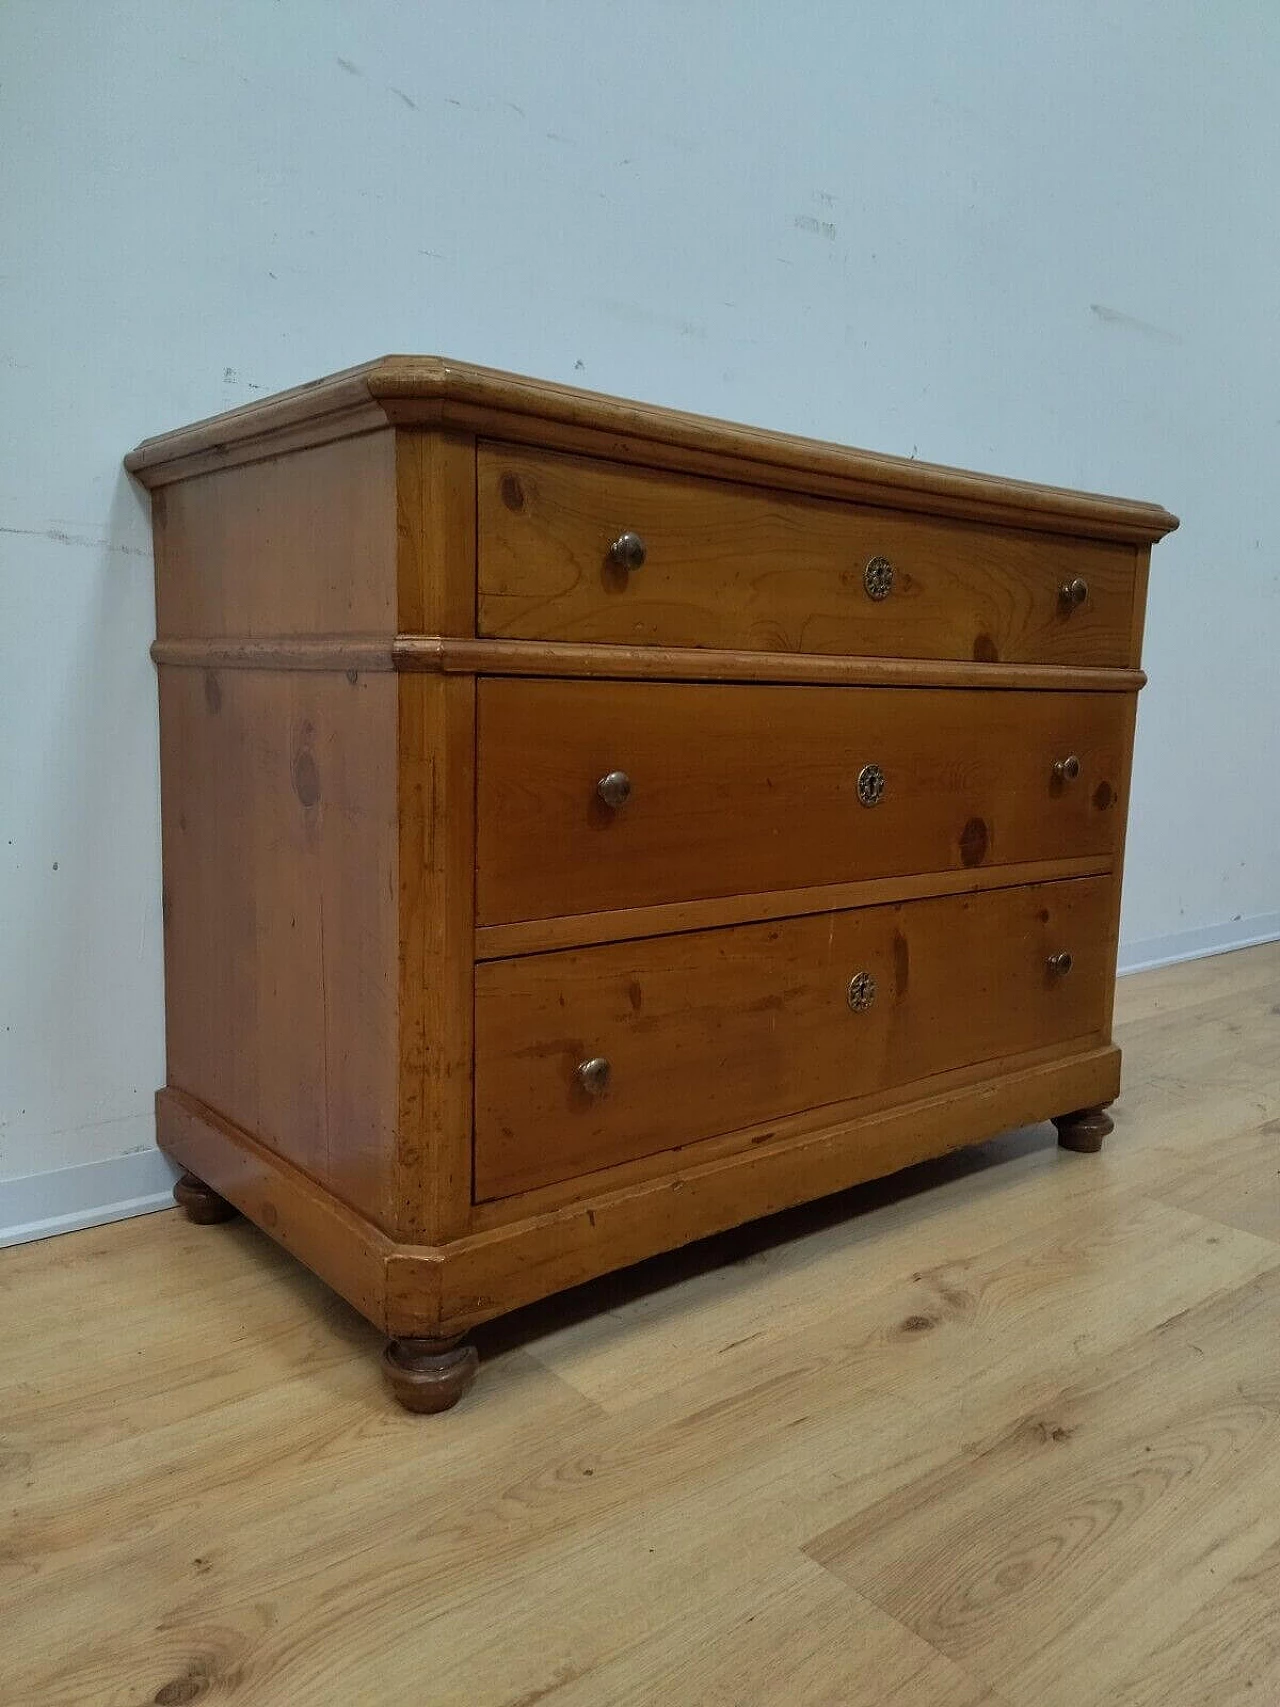 Rustic fir chest of drawers, late 19th century 15